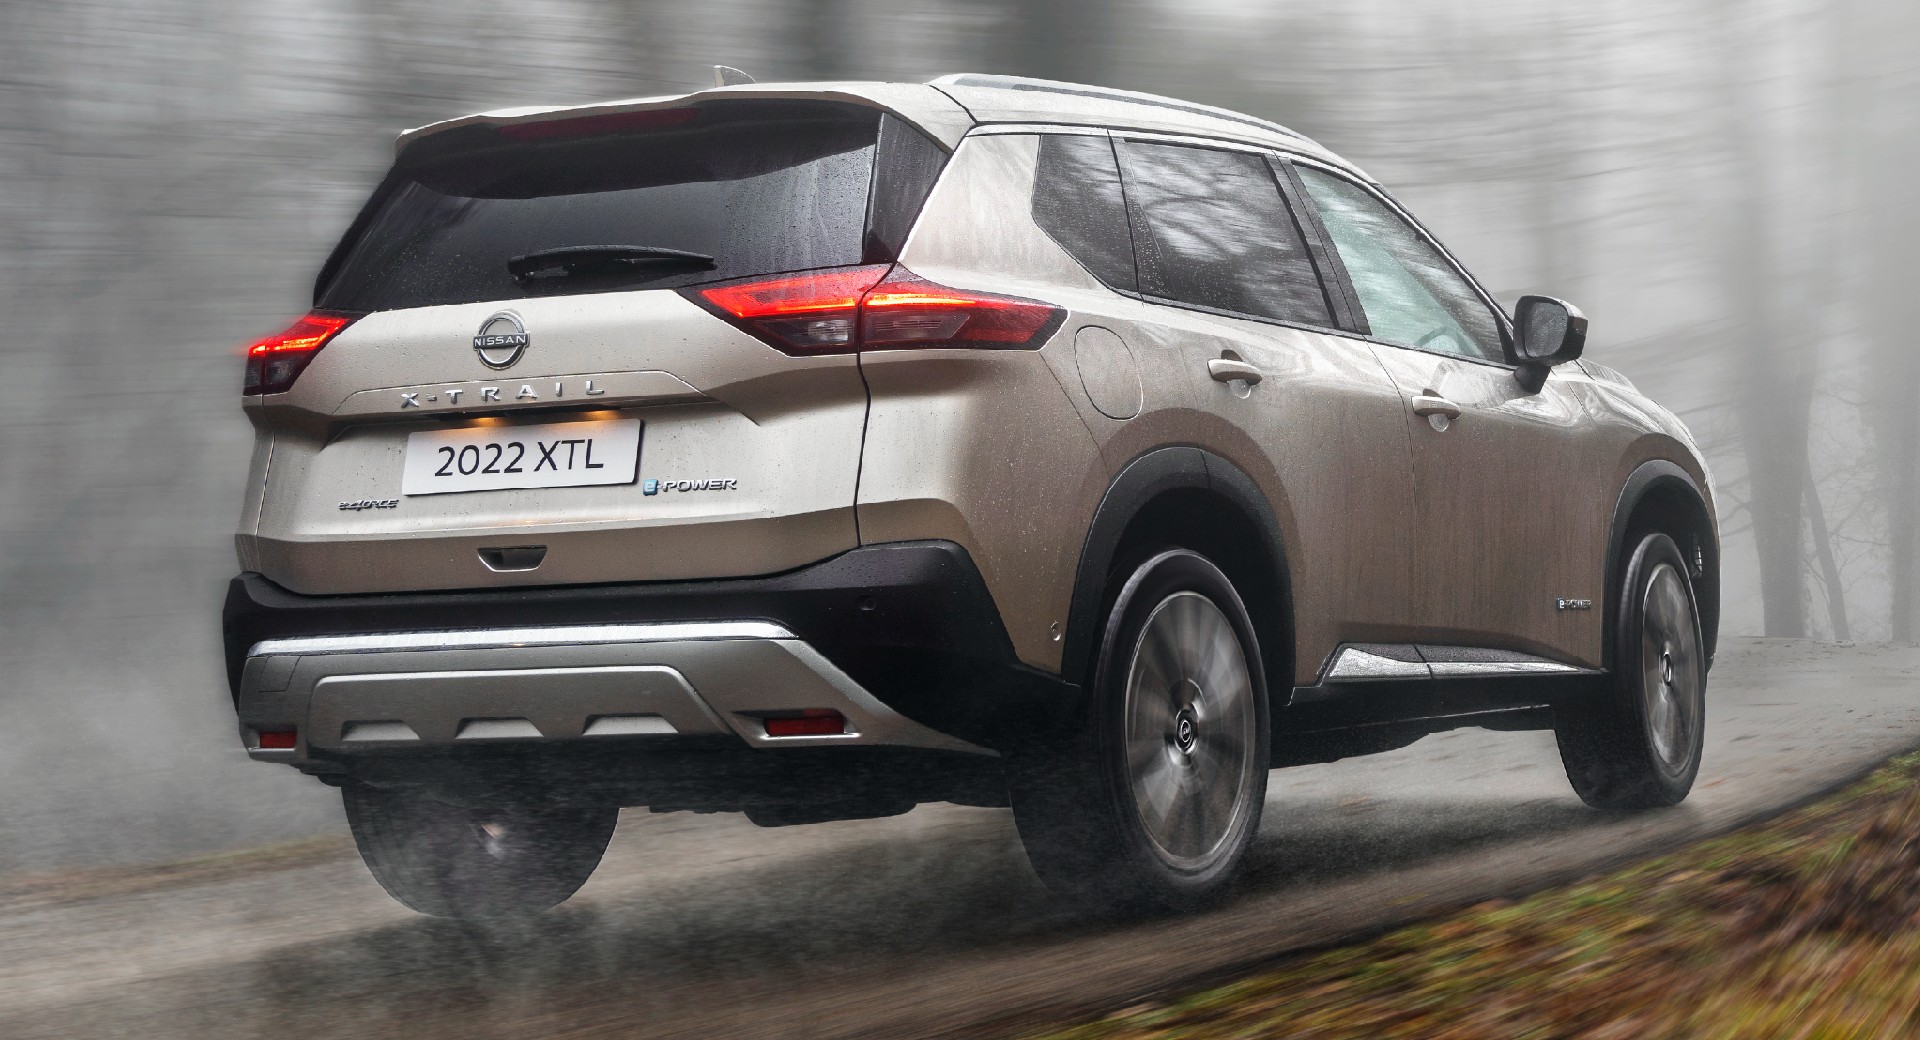 New 2023 Nissan X-Trail Revealed For Europe With Electrified